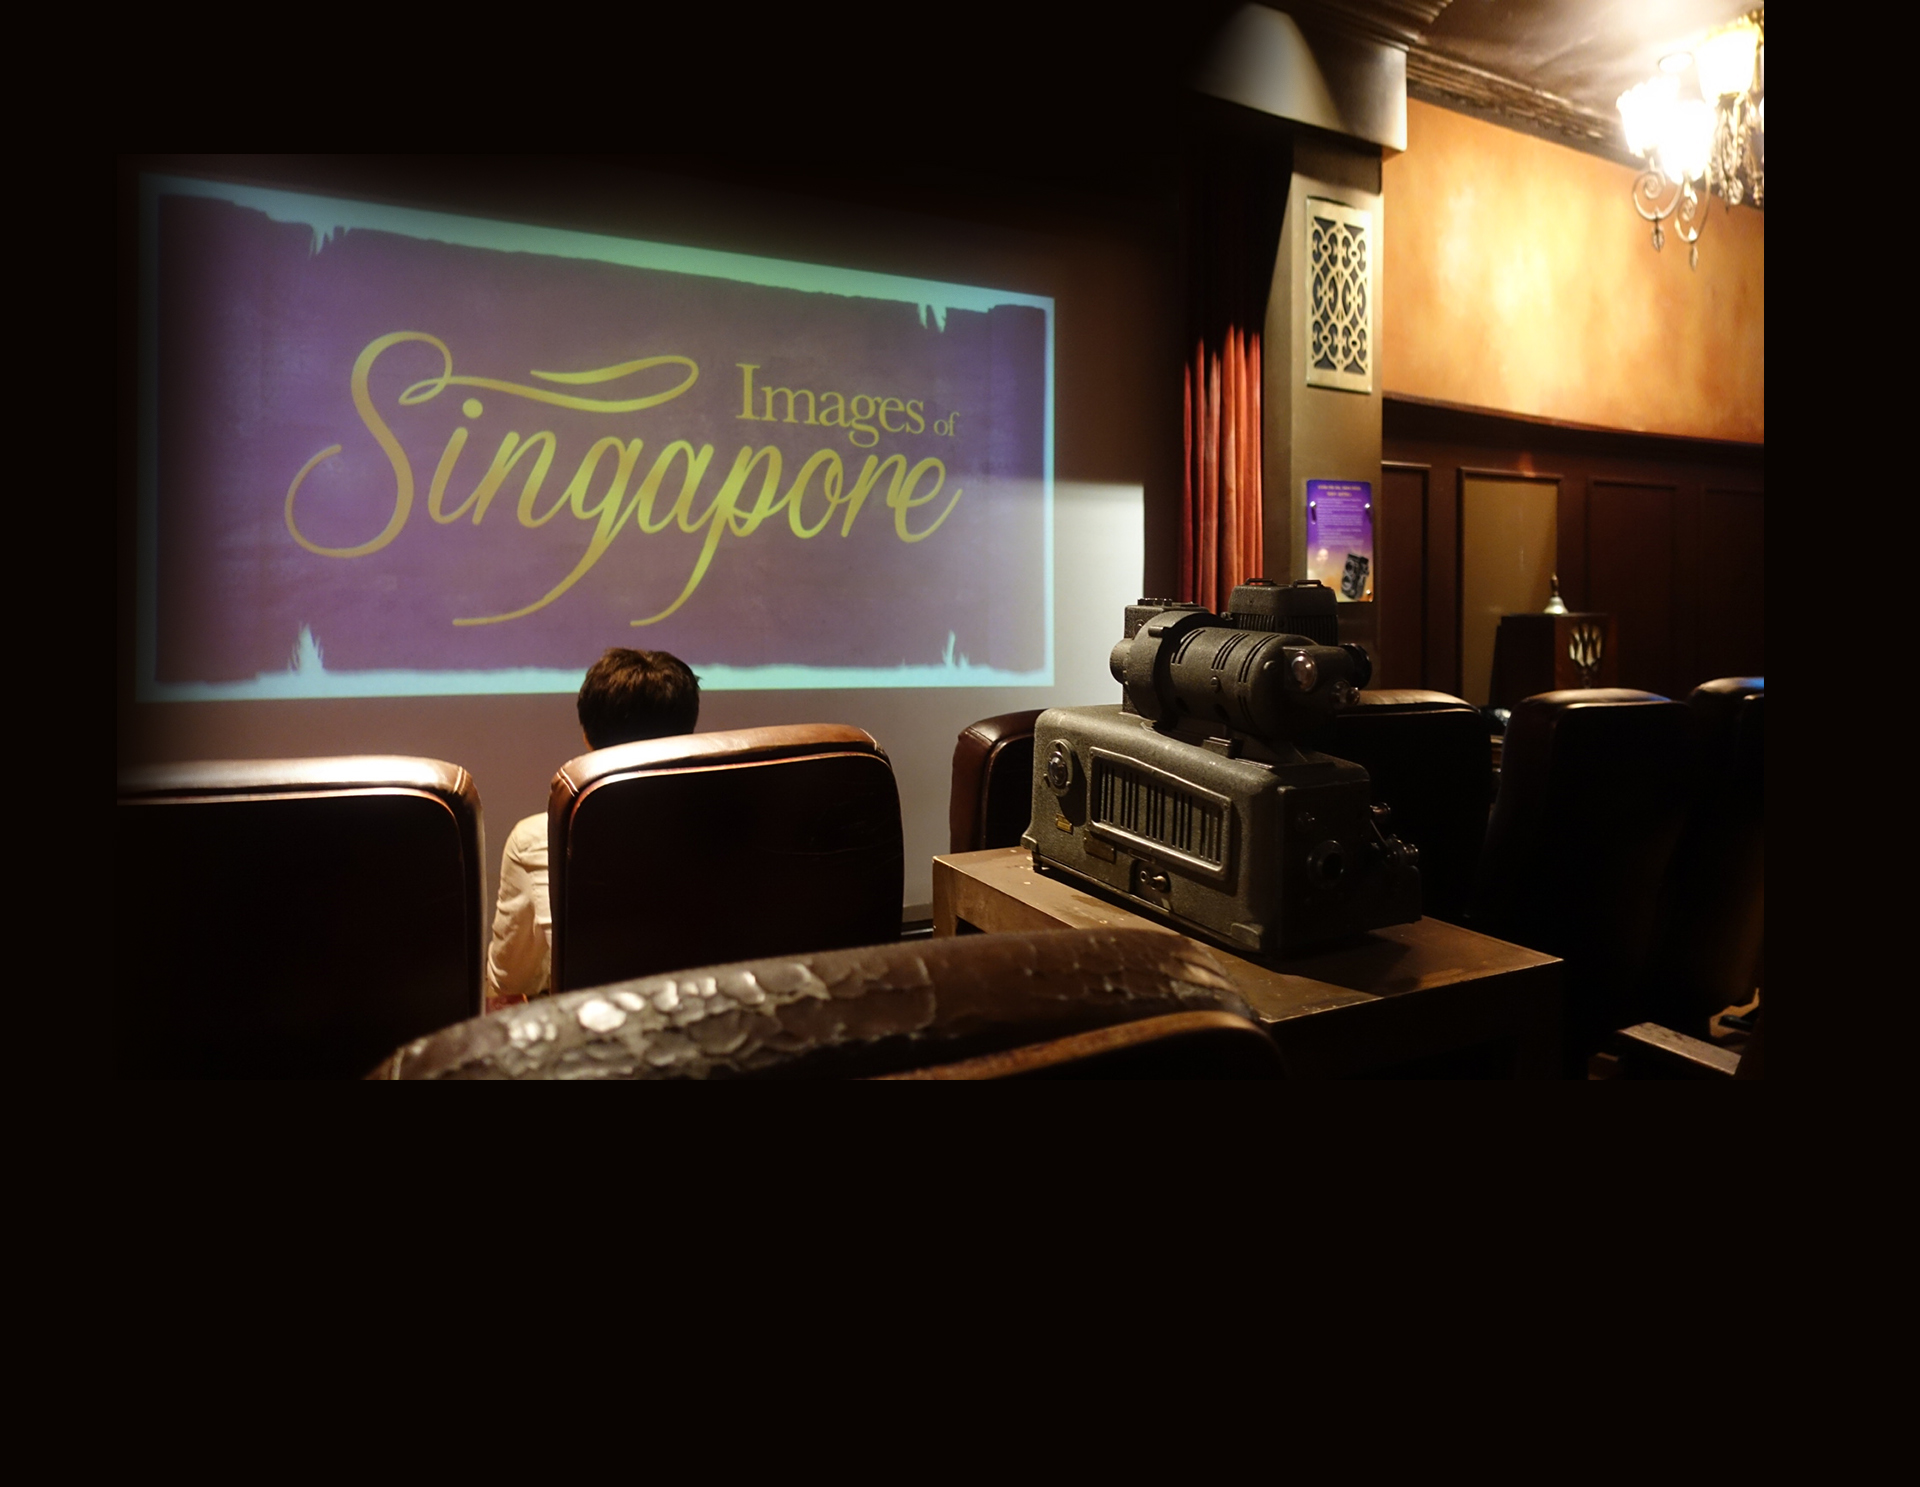 As part of Images of Singapore exhibition in Madame Tussauds, a person is sitting on a big sofa in a room that recreates Jubilee Cinema setup, complete with an old film projector.